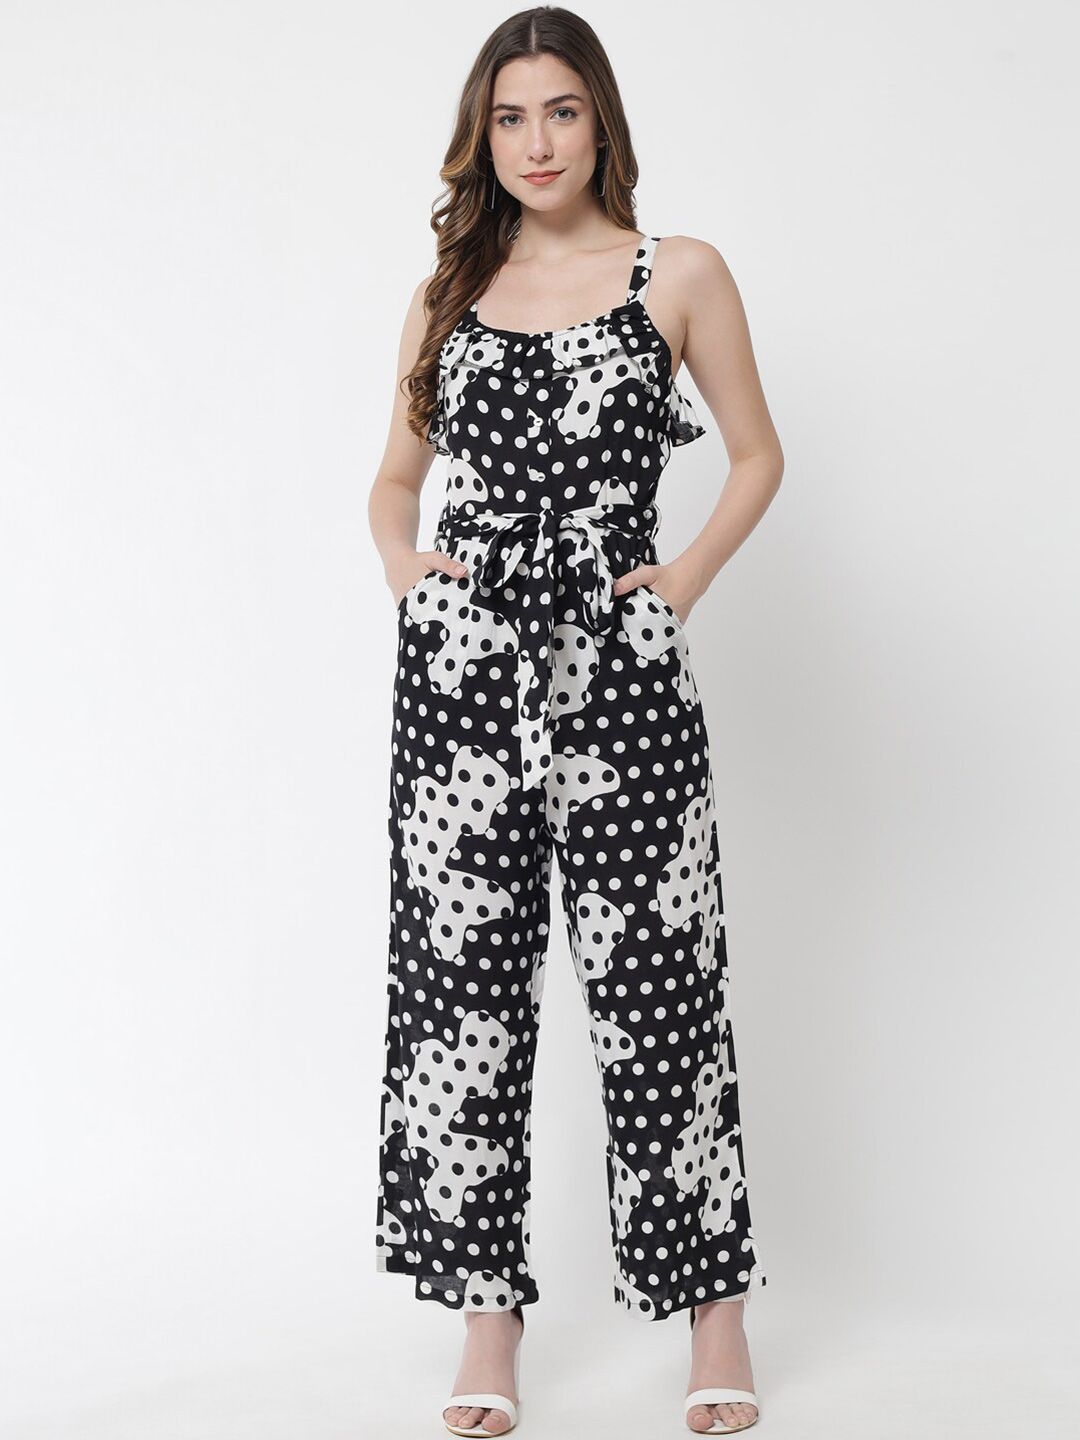 The Dry State Black & White Polka Dots Printed Cotton Basic Jumpsuit Price in India